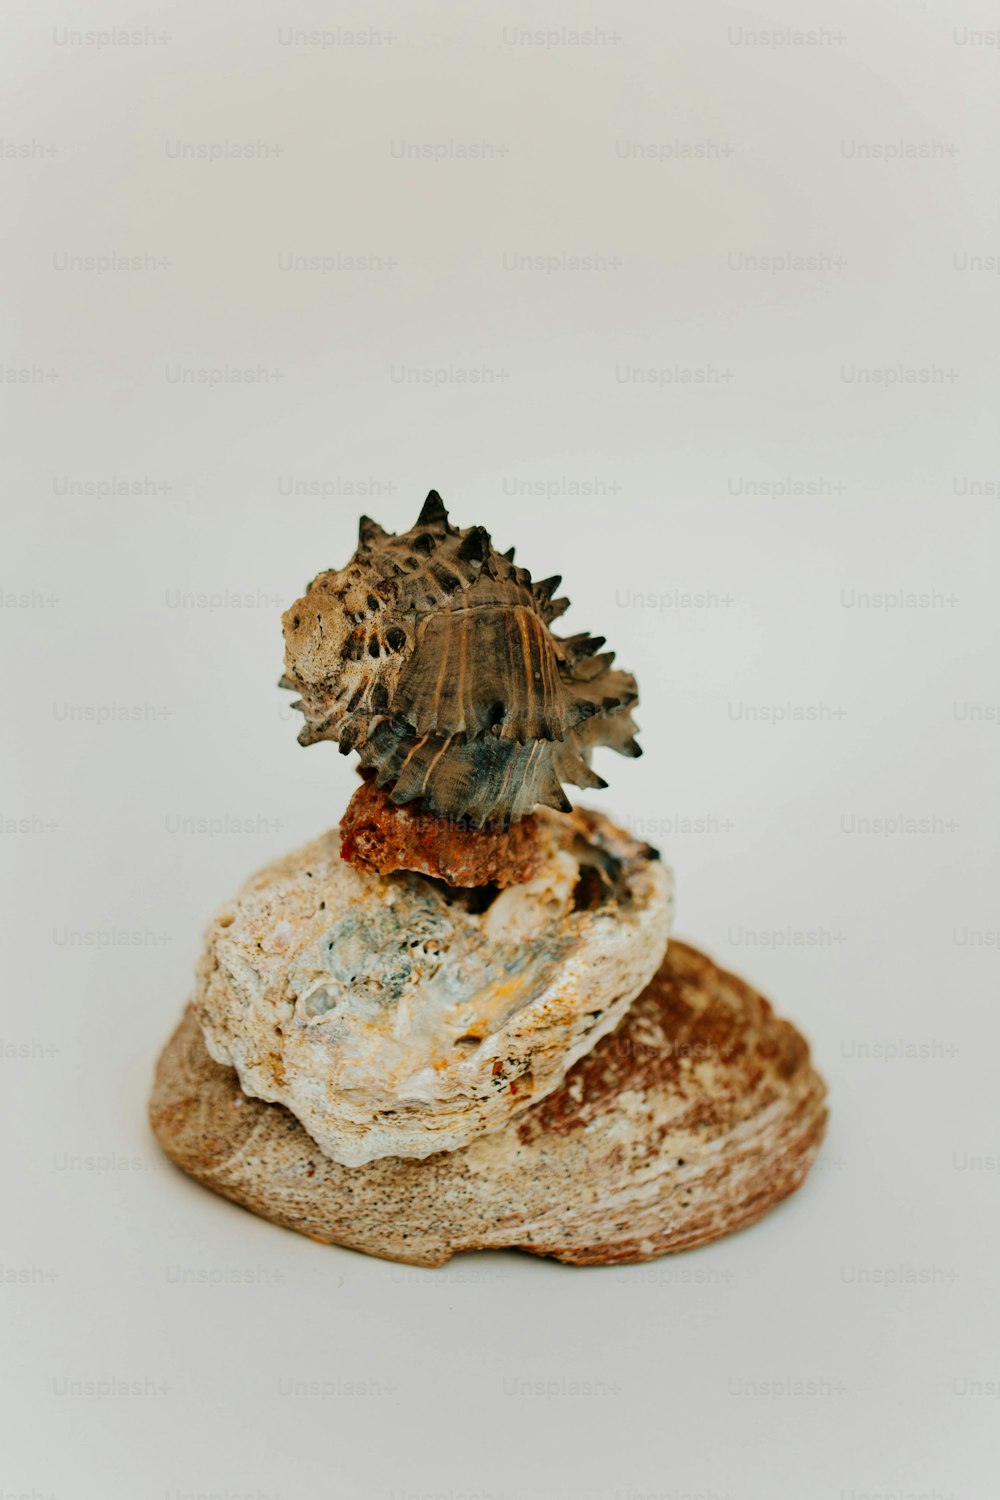 a close up of a rock with a small animal on top of it